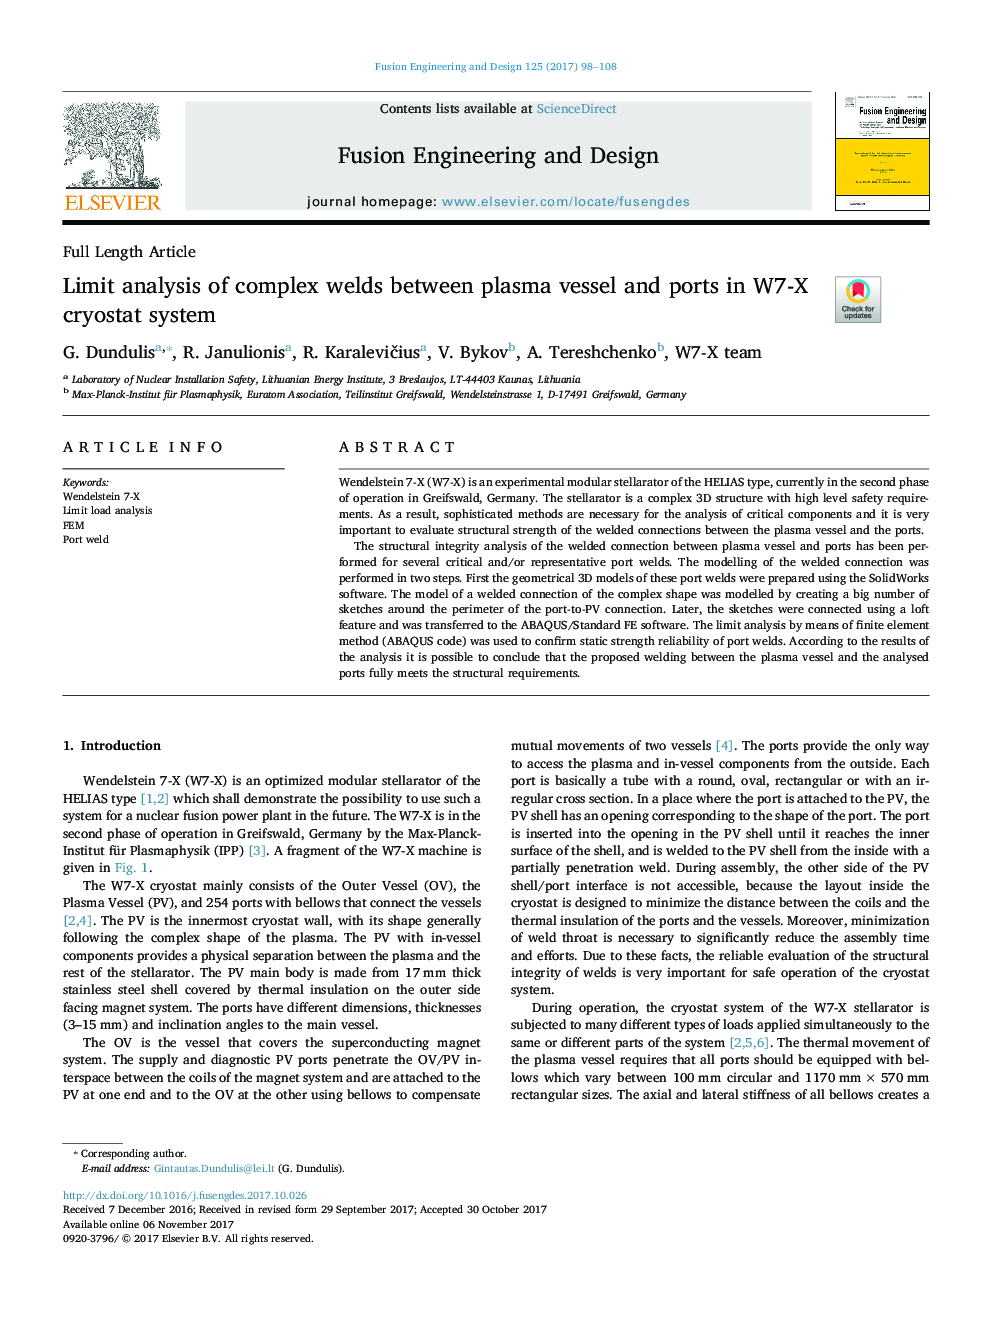 Limit analysis of complex welds between plasma vessel and ports in W7-X cryostat system